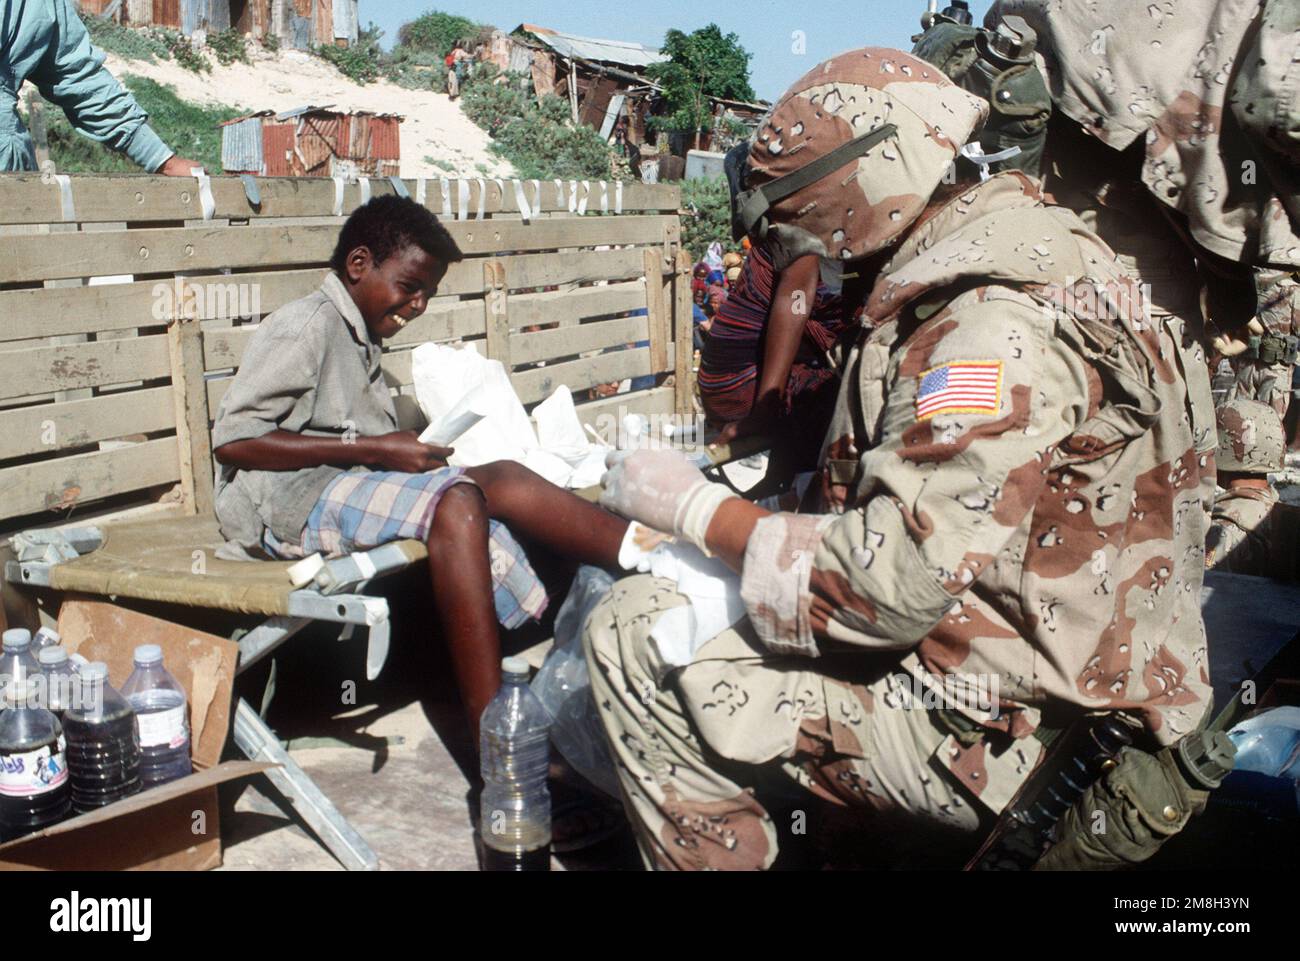 A Navy corpsman serving with Combat Service Support Detachment 15 (CSSD-15) treats a Somali girl's infected foot. He is participating in a medical civic action program being conducted during the multinational relief effort Operation Restore Hope. Subject Operation/Series: RESTORE HOPE Base: Modadishu Country: Somalia (SOM) Stock Photo